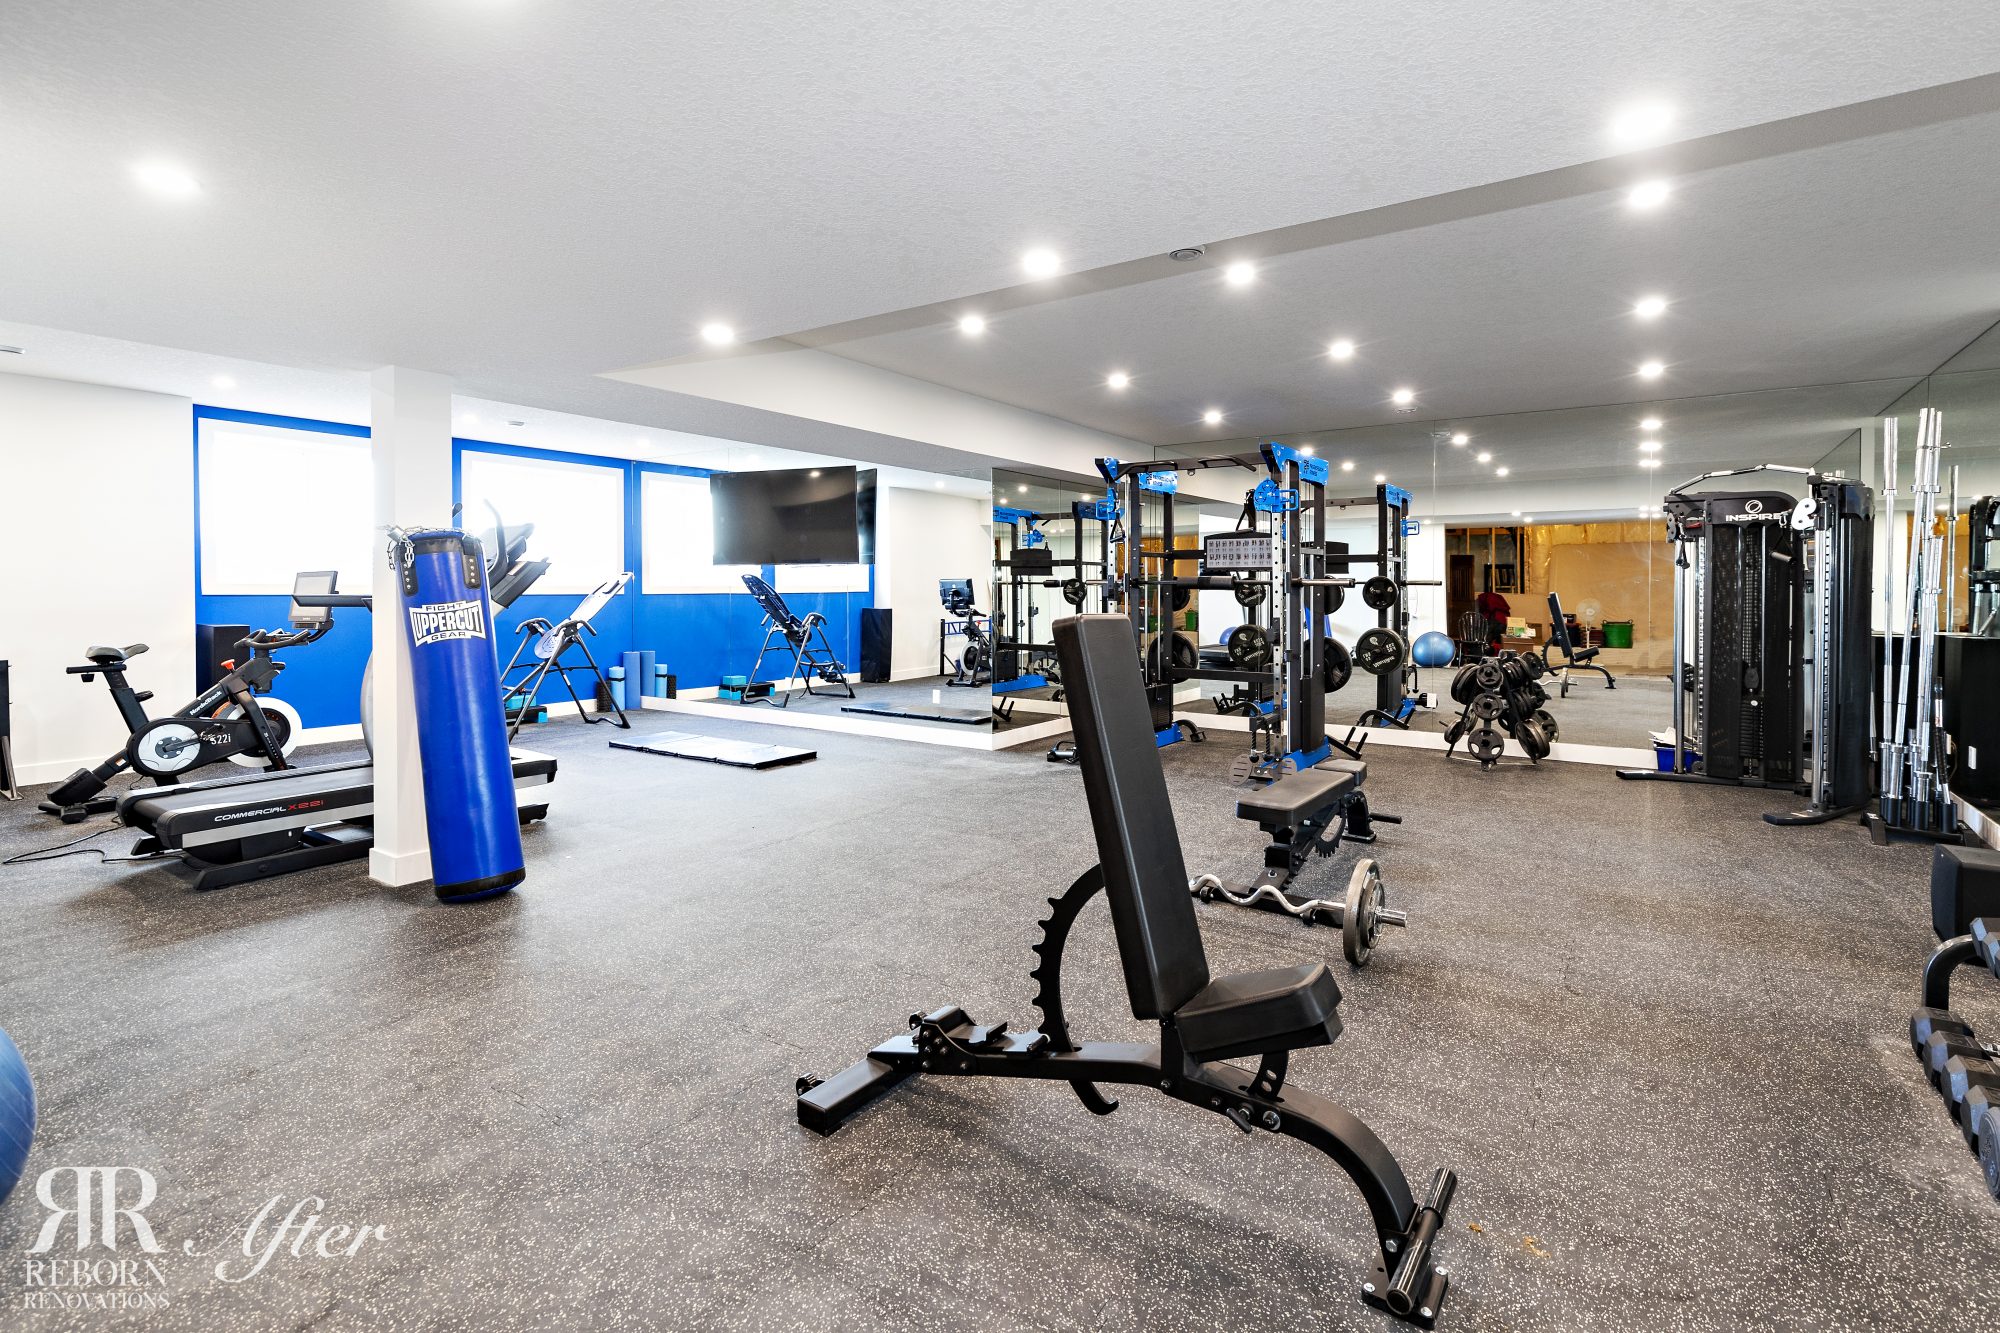 A basement gym with workout equipment in it.